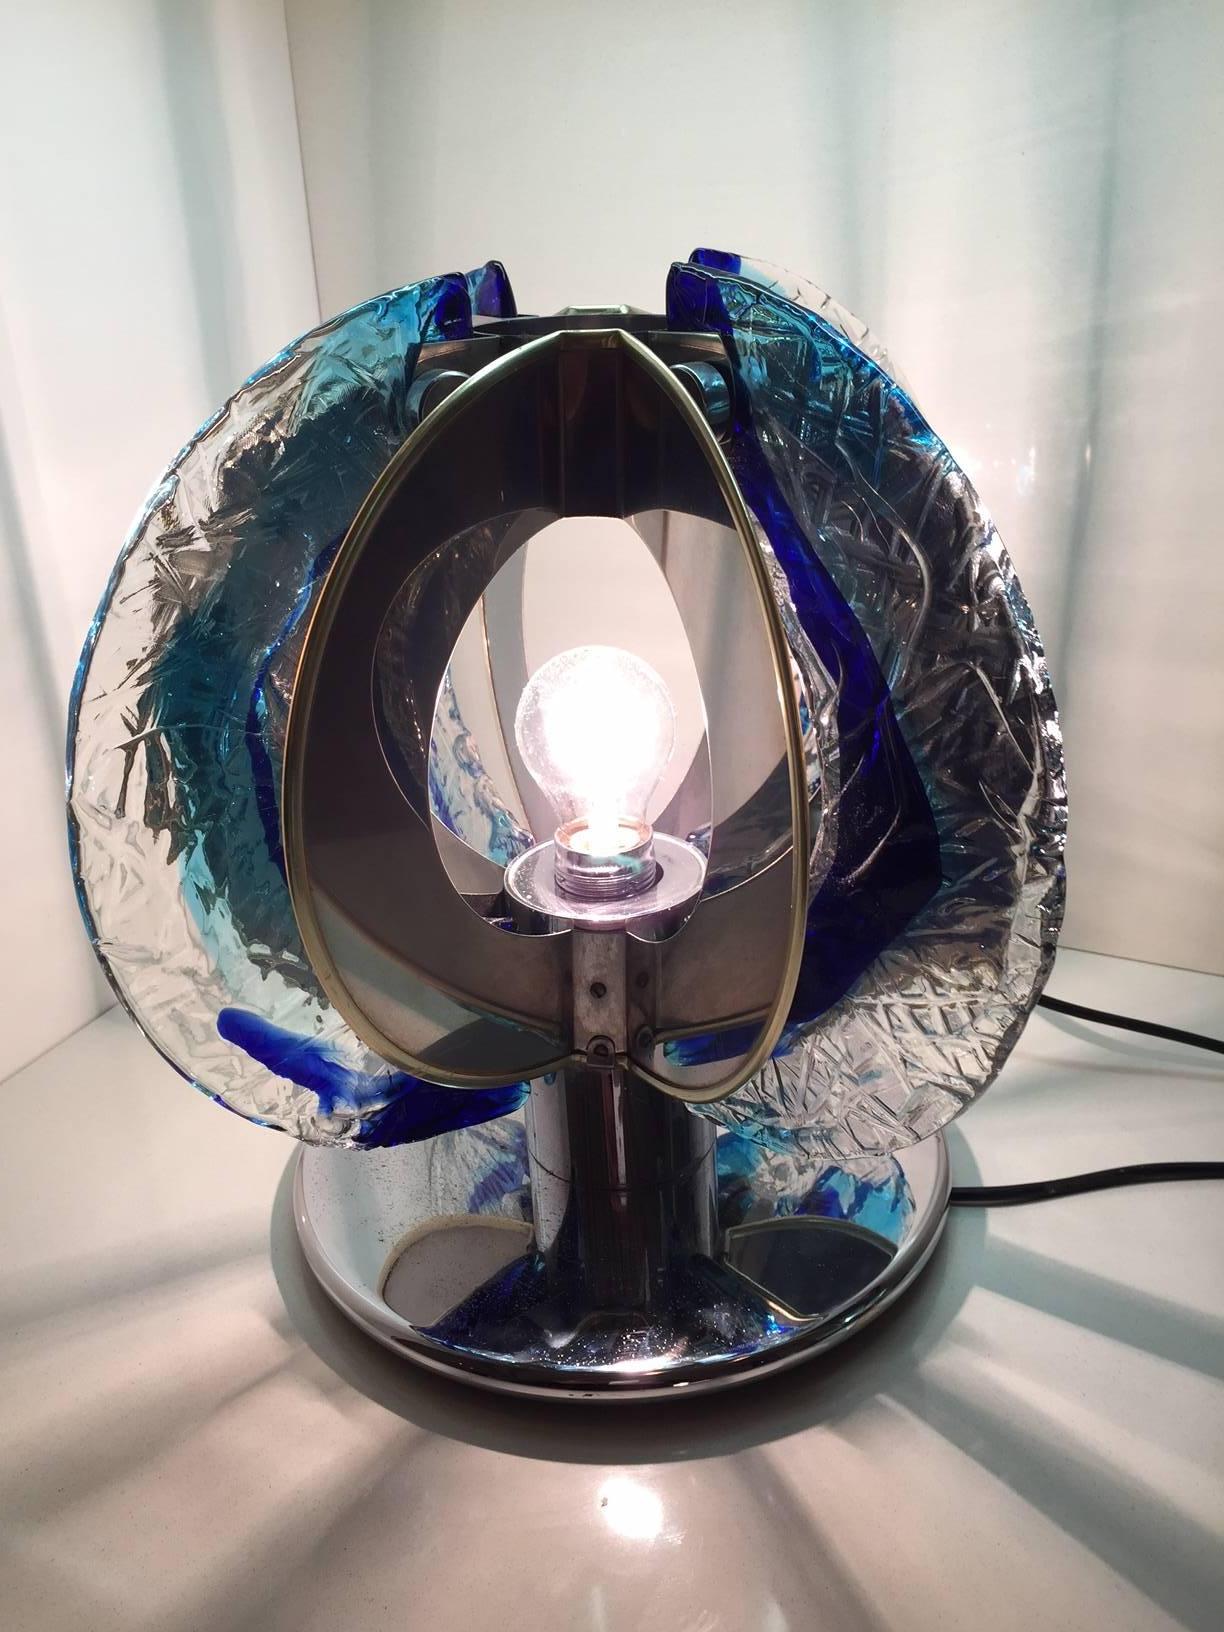 Wonderful table lamp designed by Angelo Brotto for Esperia in 1976. Textured clear glass petals with irregular cobalt blue streaks running through them. A complex chromed metal structure supports the four glass petals. True work of art lamp that